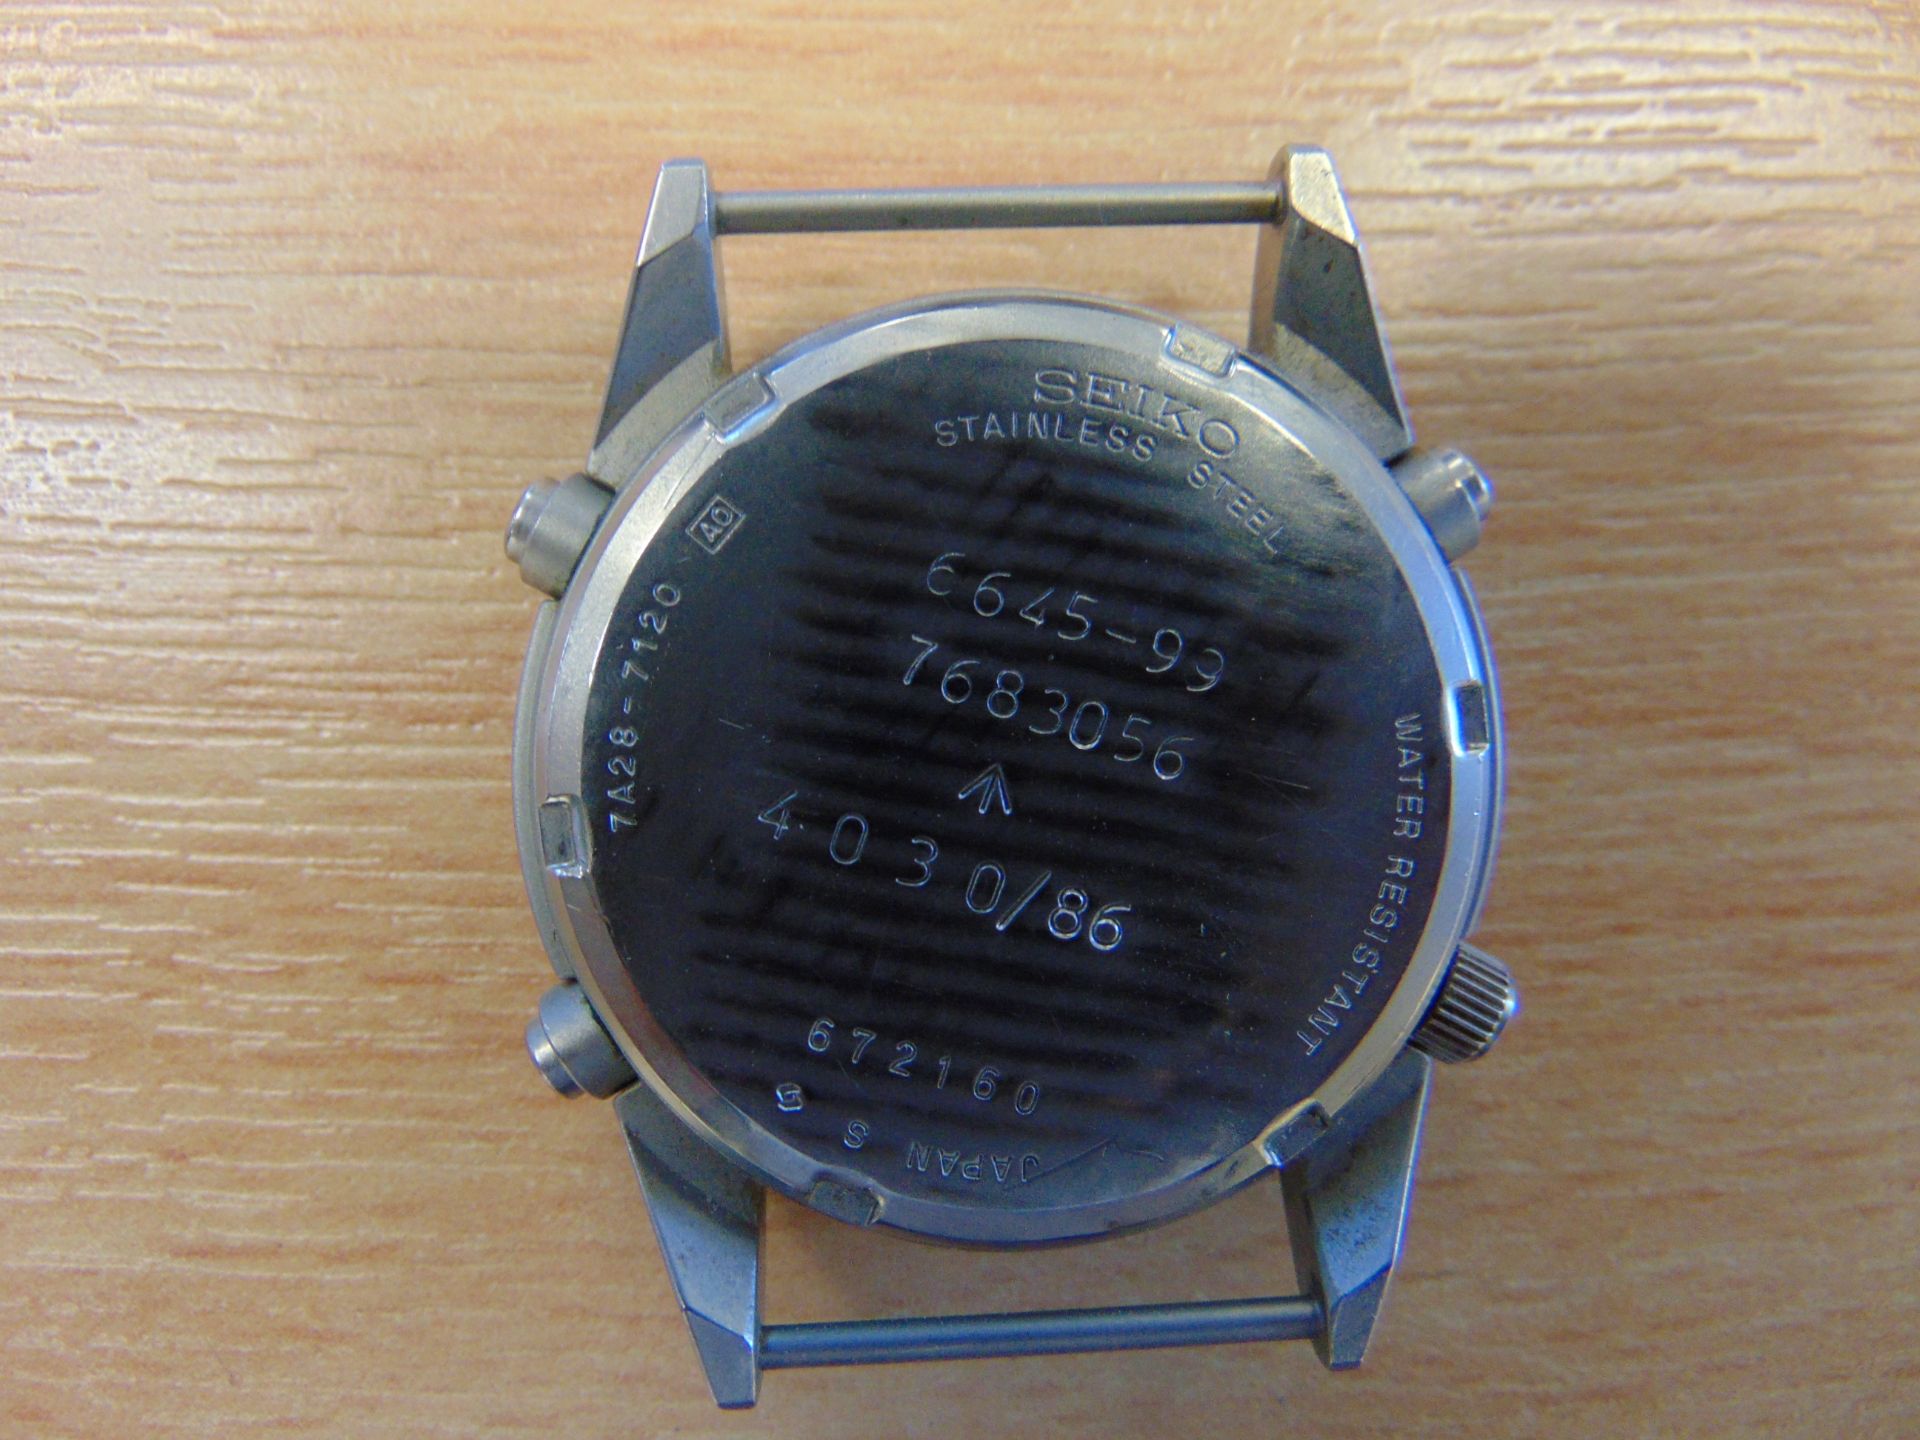 Seiko Gen 1 Pilots Chrono RAF Harrier Force Issue Nato Marked Dated 1986 - Image 5 of 6